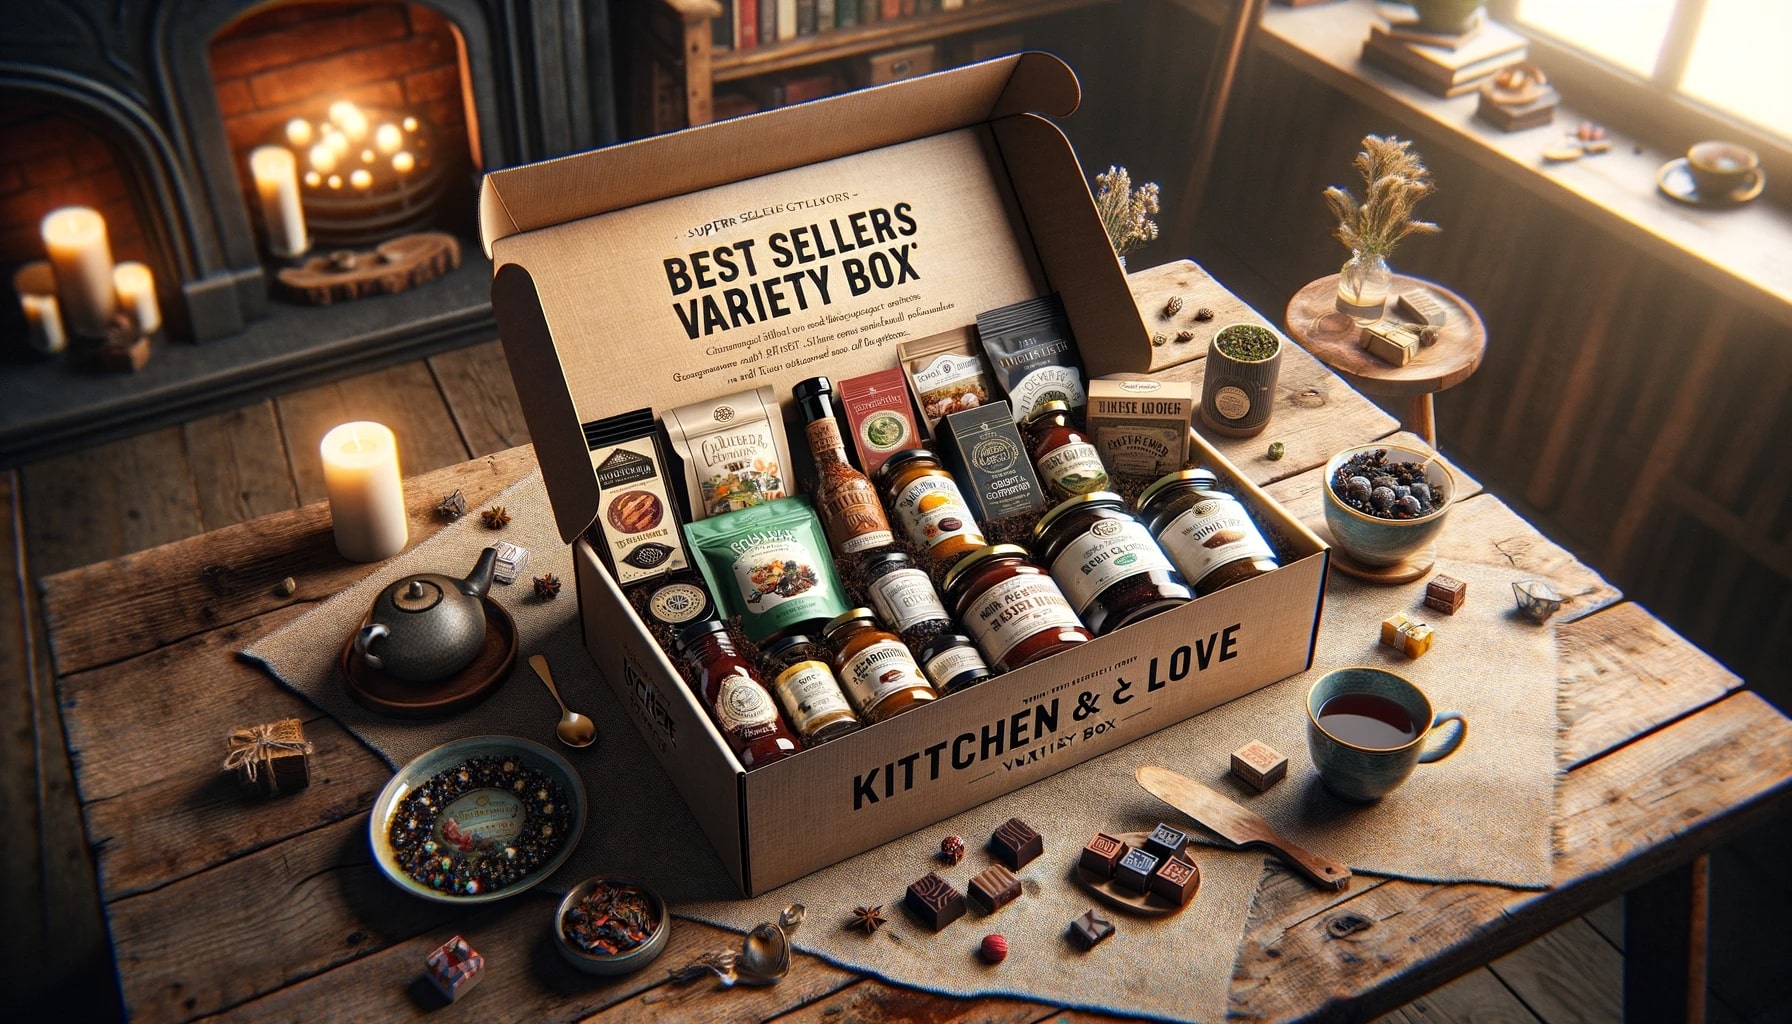 Kitchen & Love variety box – the best sellers gift.